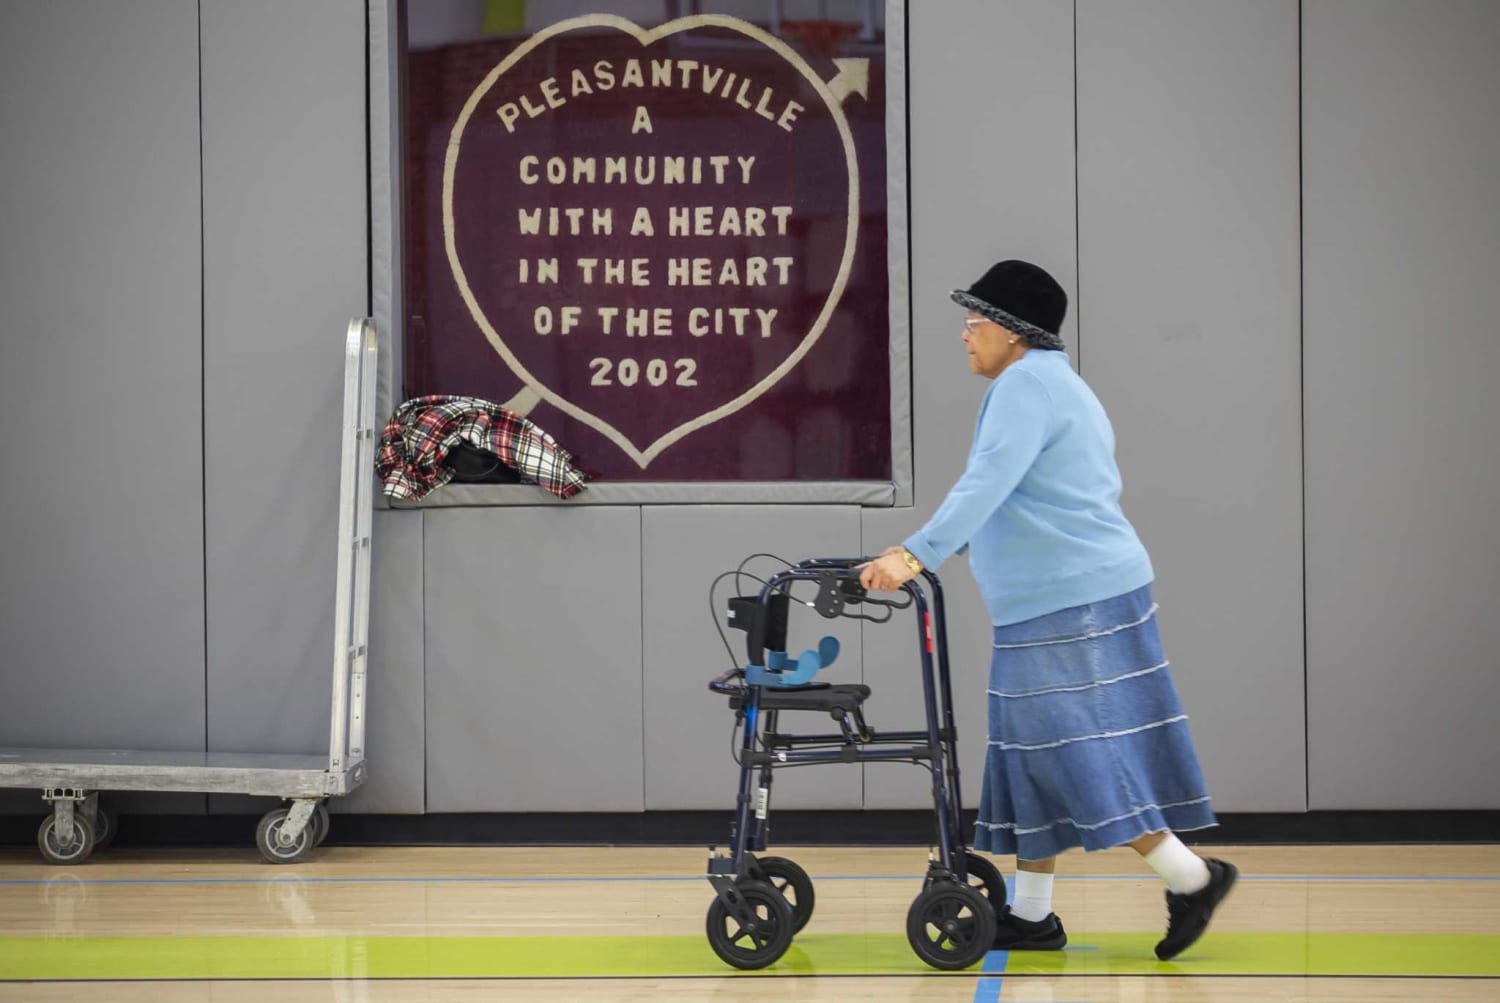 Worried about the air quality, Pleasantville residents came up with a one-of-a-kind solution